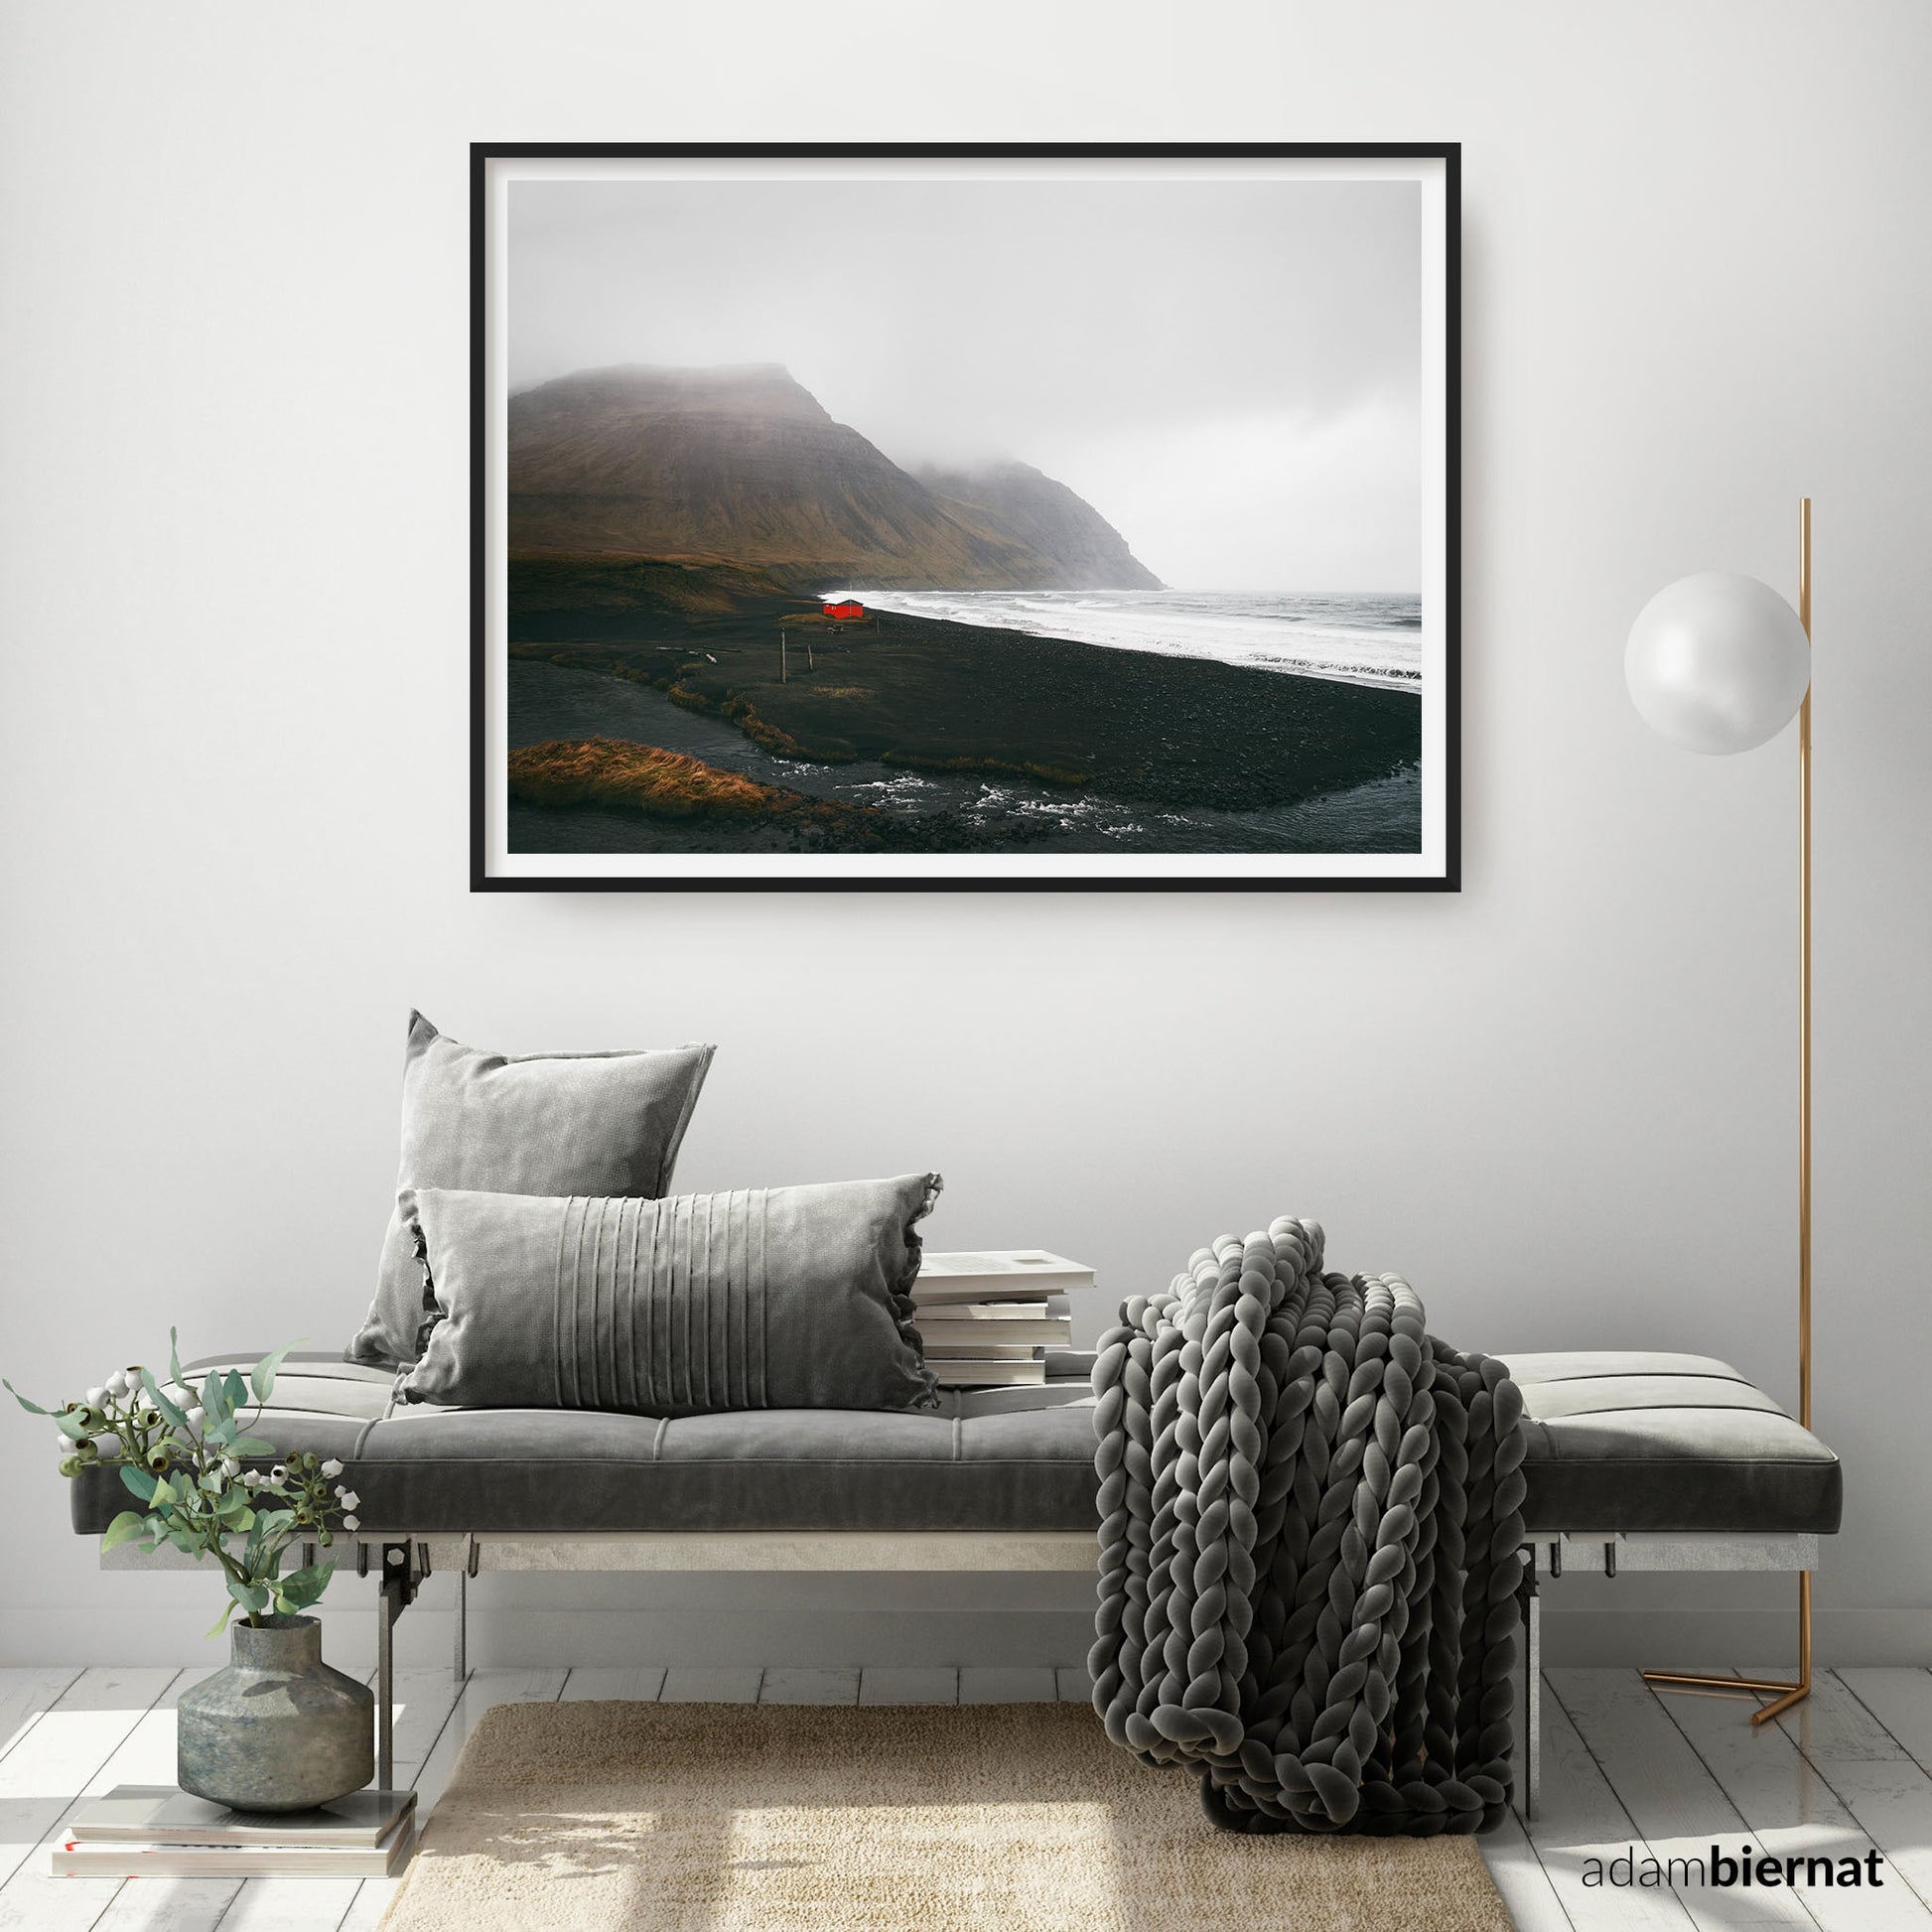 Nordic Interior Design - Iceland Nature Landscape Photography Print - Black Sand Beach and Red Cabin